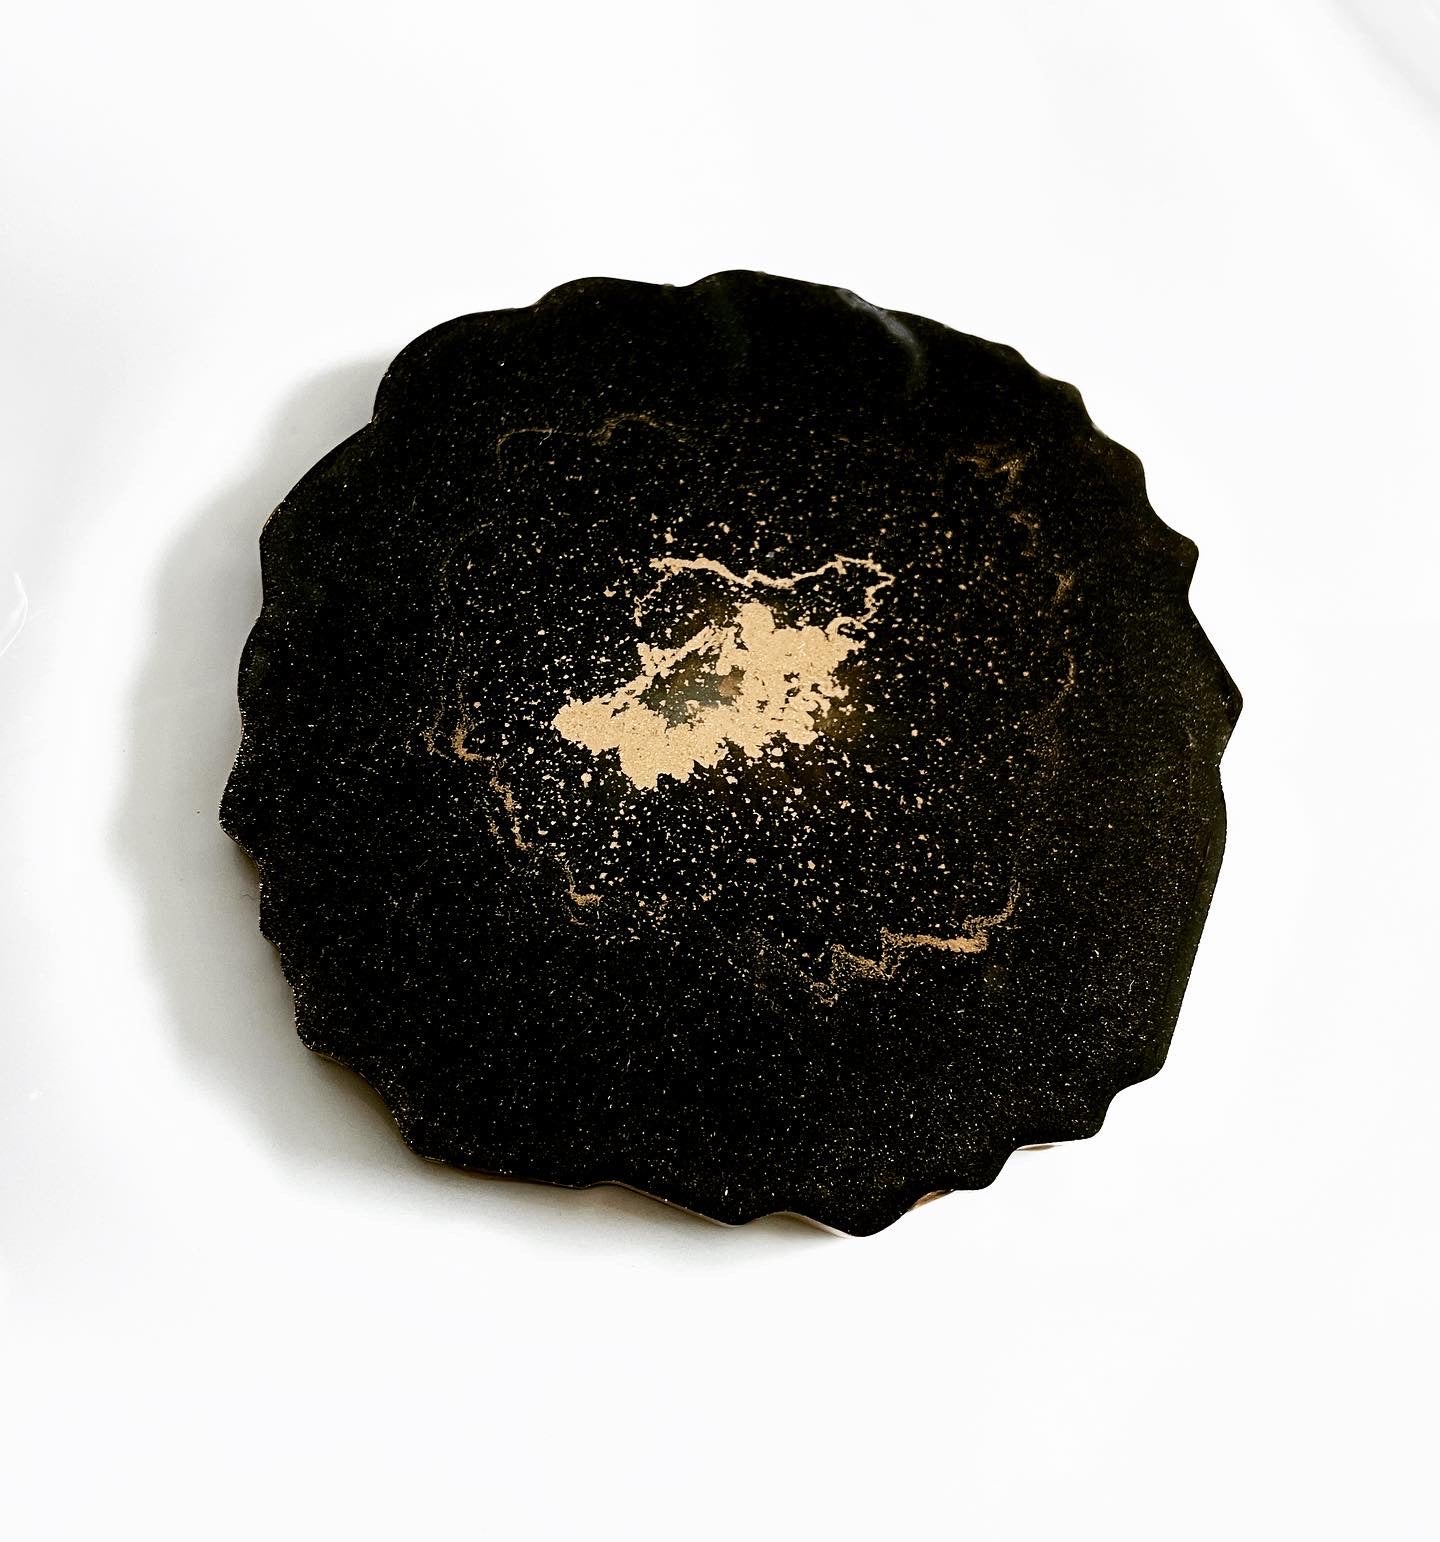 Resin Coasters - Black and Gold - Set of 4